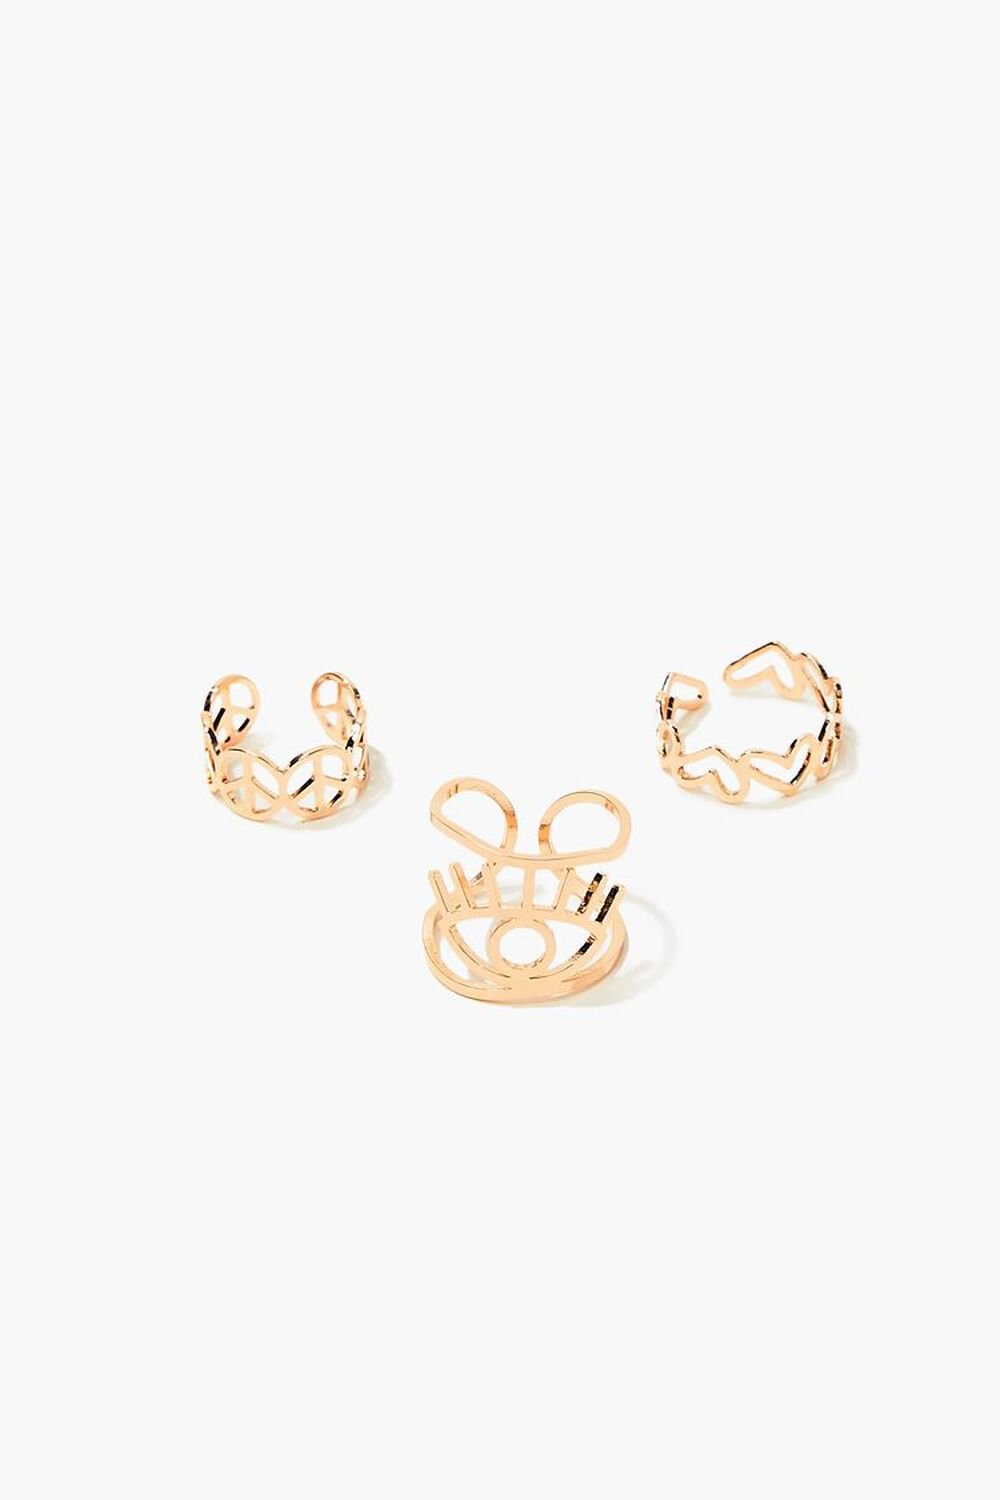 GOLD Peace Sign & Heart Toe Ring Set, image 1